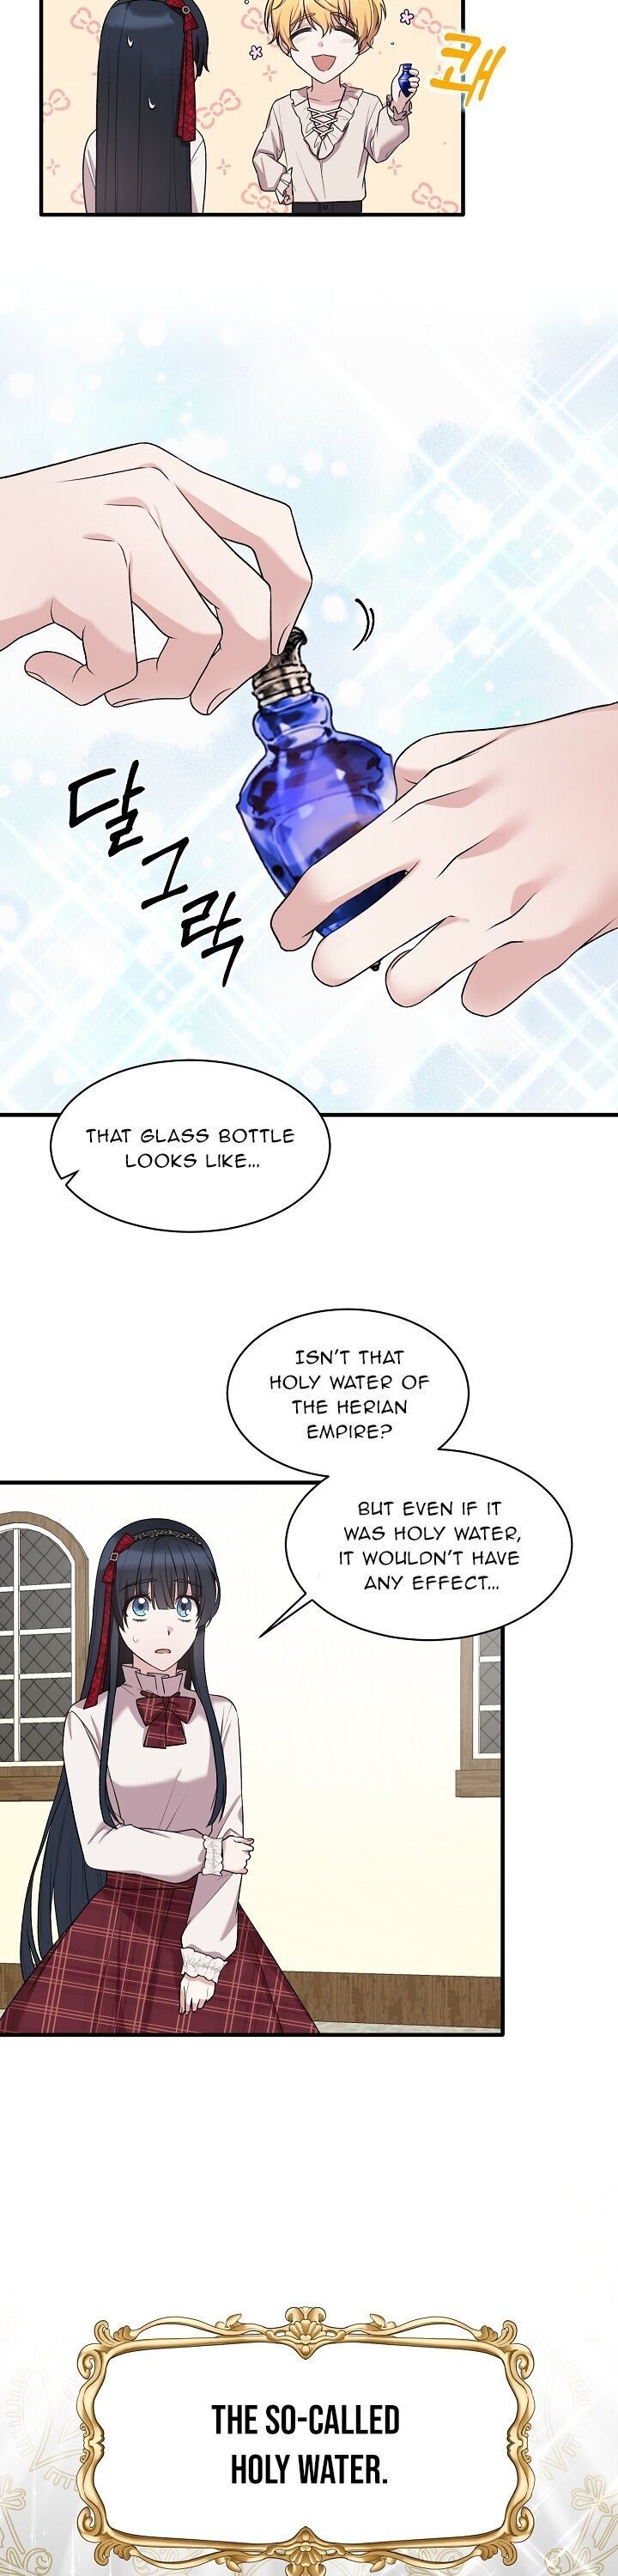 Angel or Villainess chapter 41 - Page 9